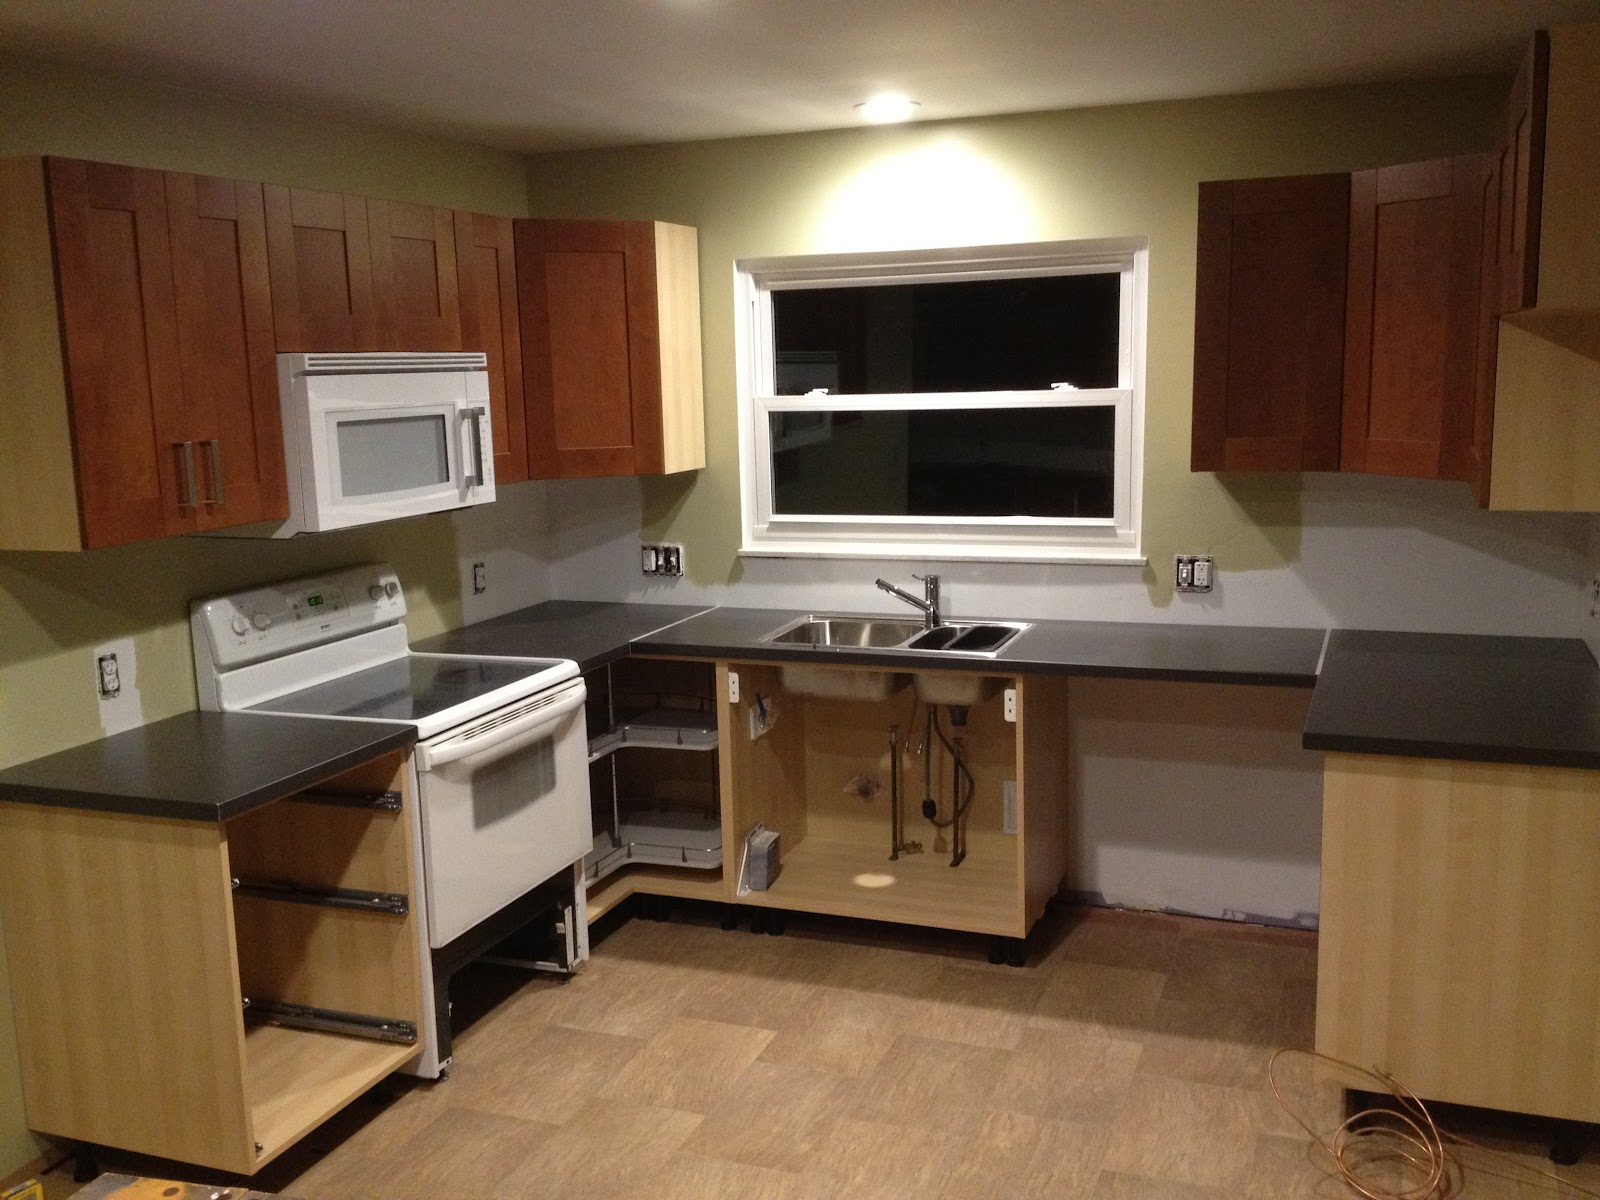 Our Ikea Kitchen Cabinets And Countertops Part 2